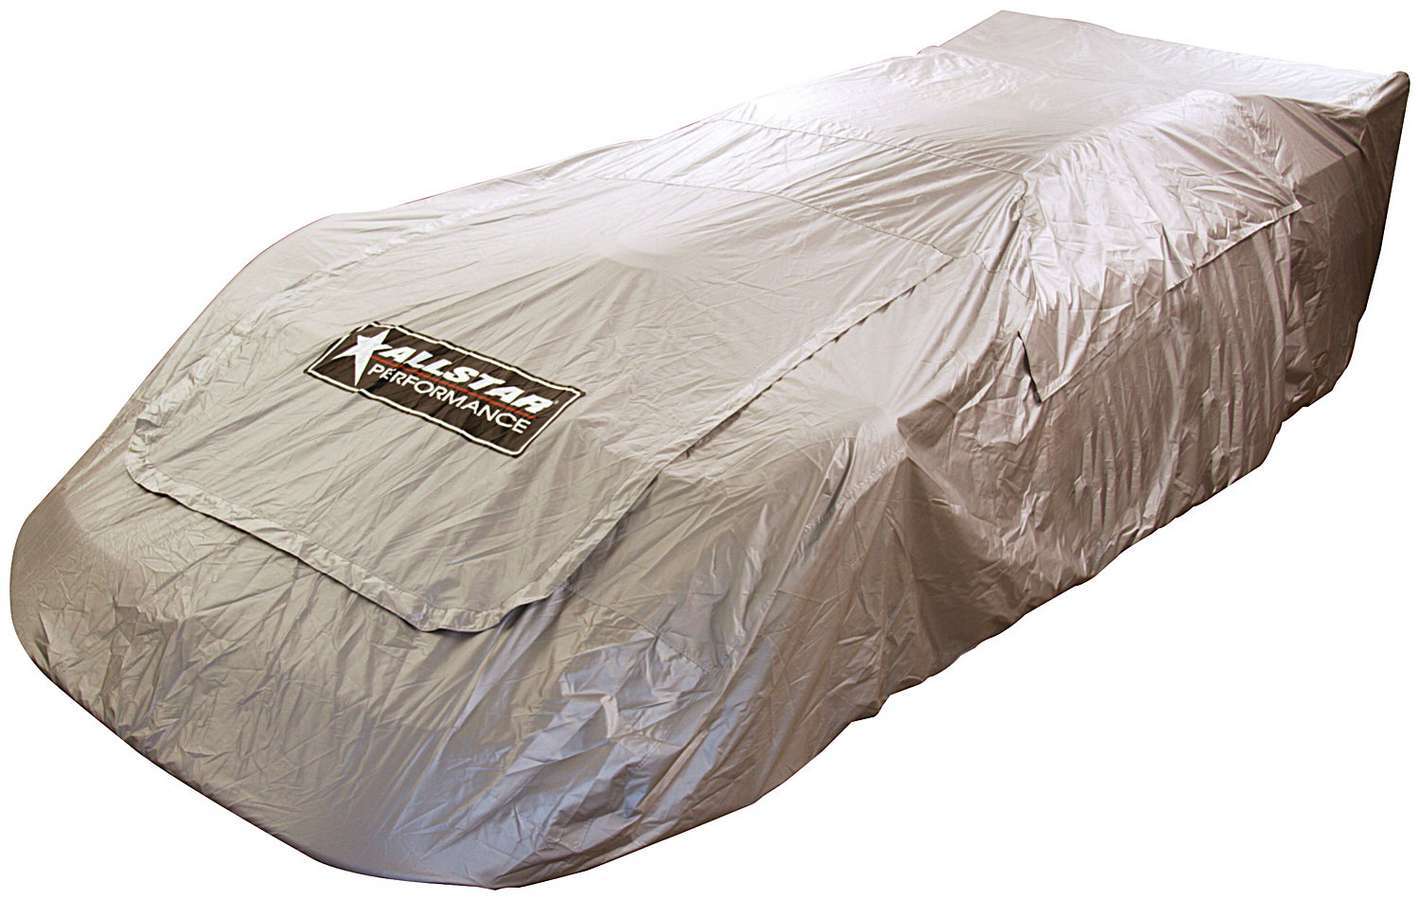 Car Cover Template ABC and Street Stock